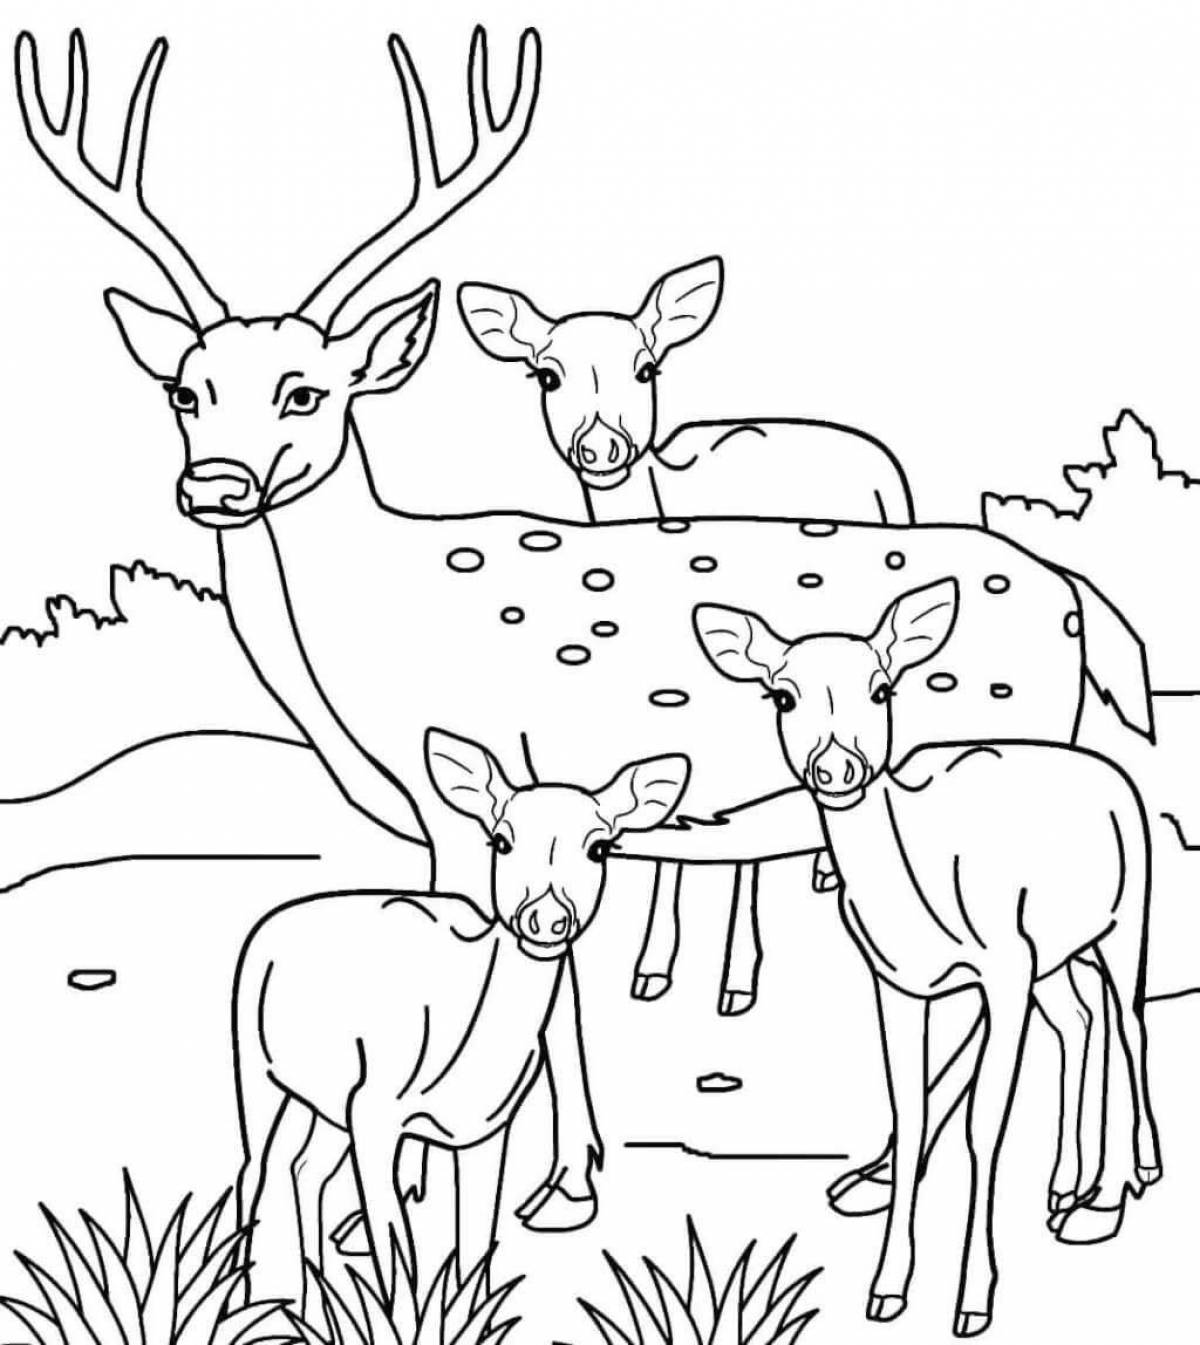 Exquisite deer coloring book for 3-4 year olds